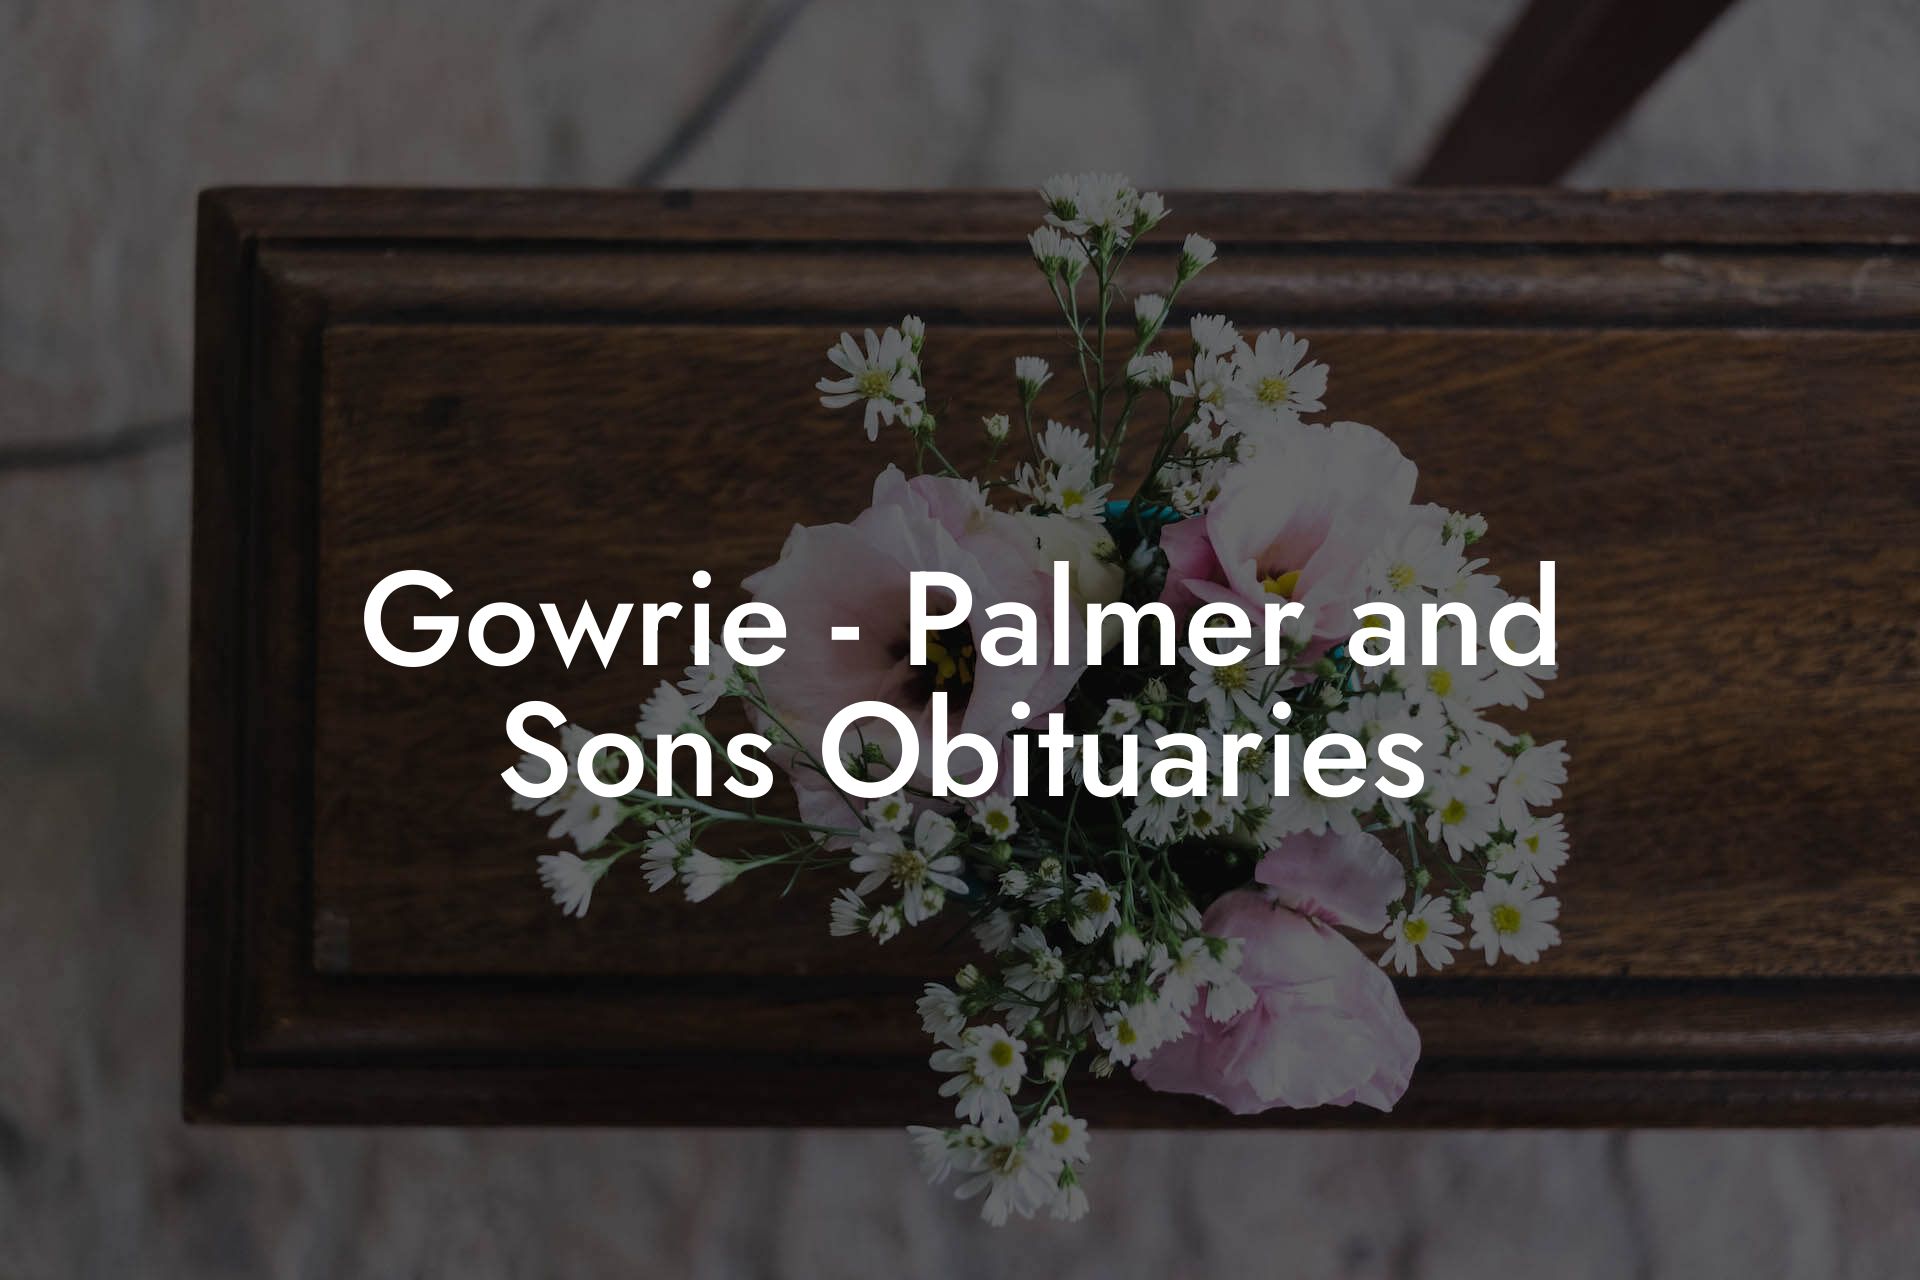 Gowrie - Palmer and Sons Obituaries